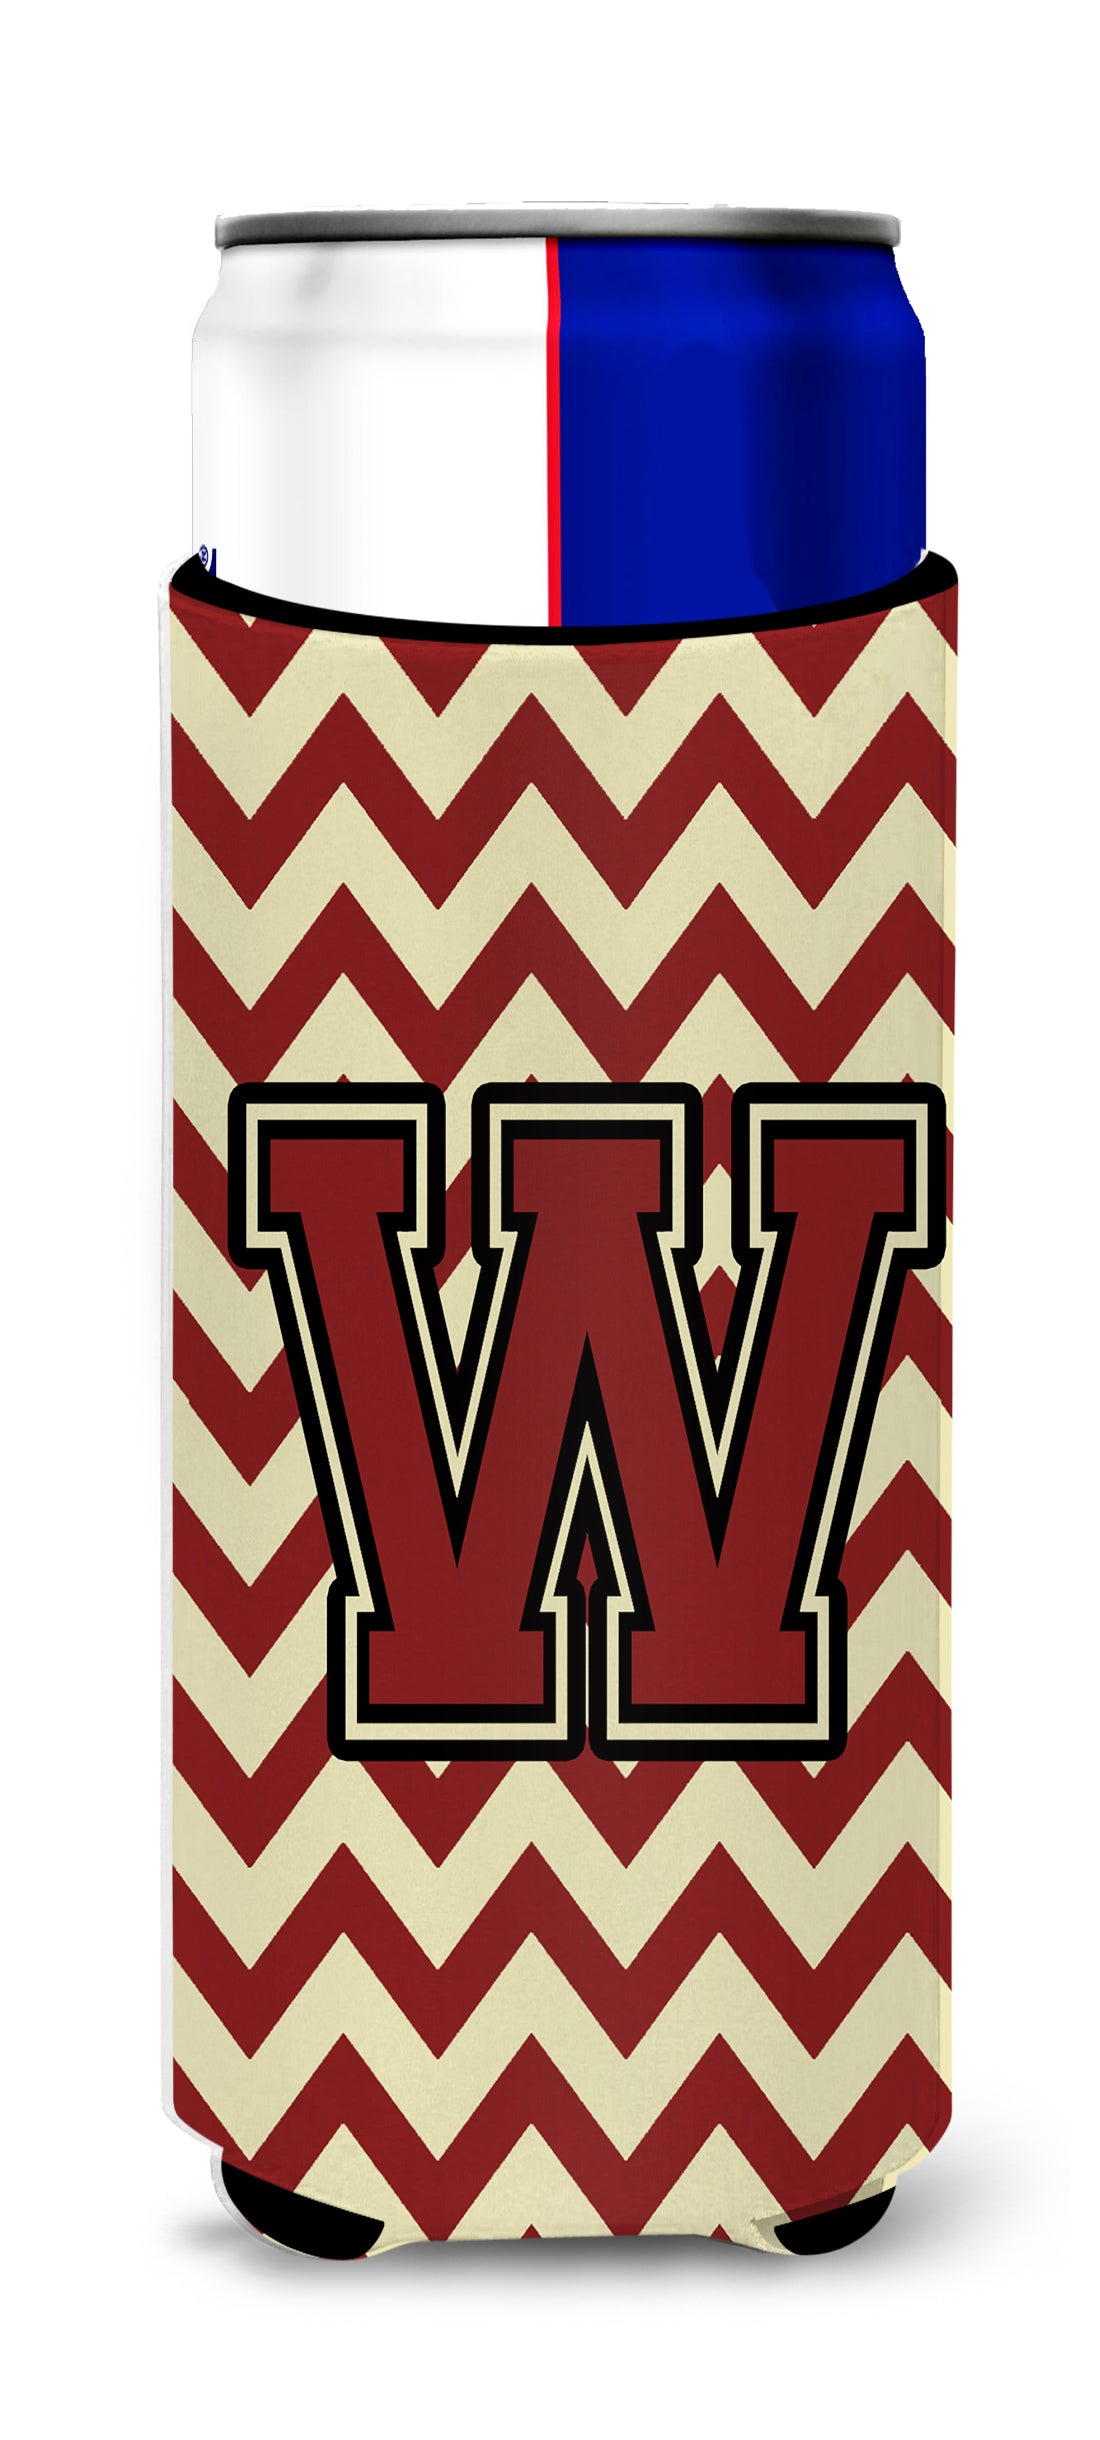 Letter W Chevron Maroon and Gold Ultra Beverage Insulators for slim cans CJ1061-WMUK.